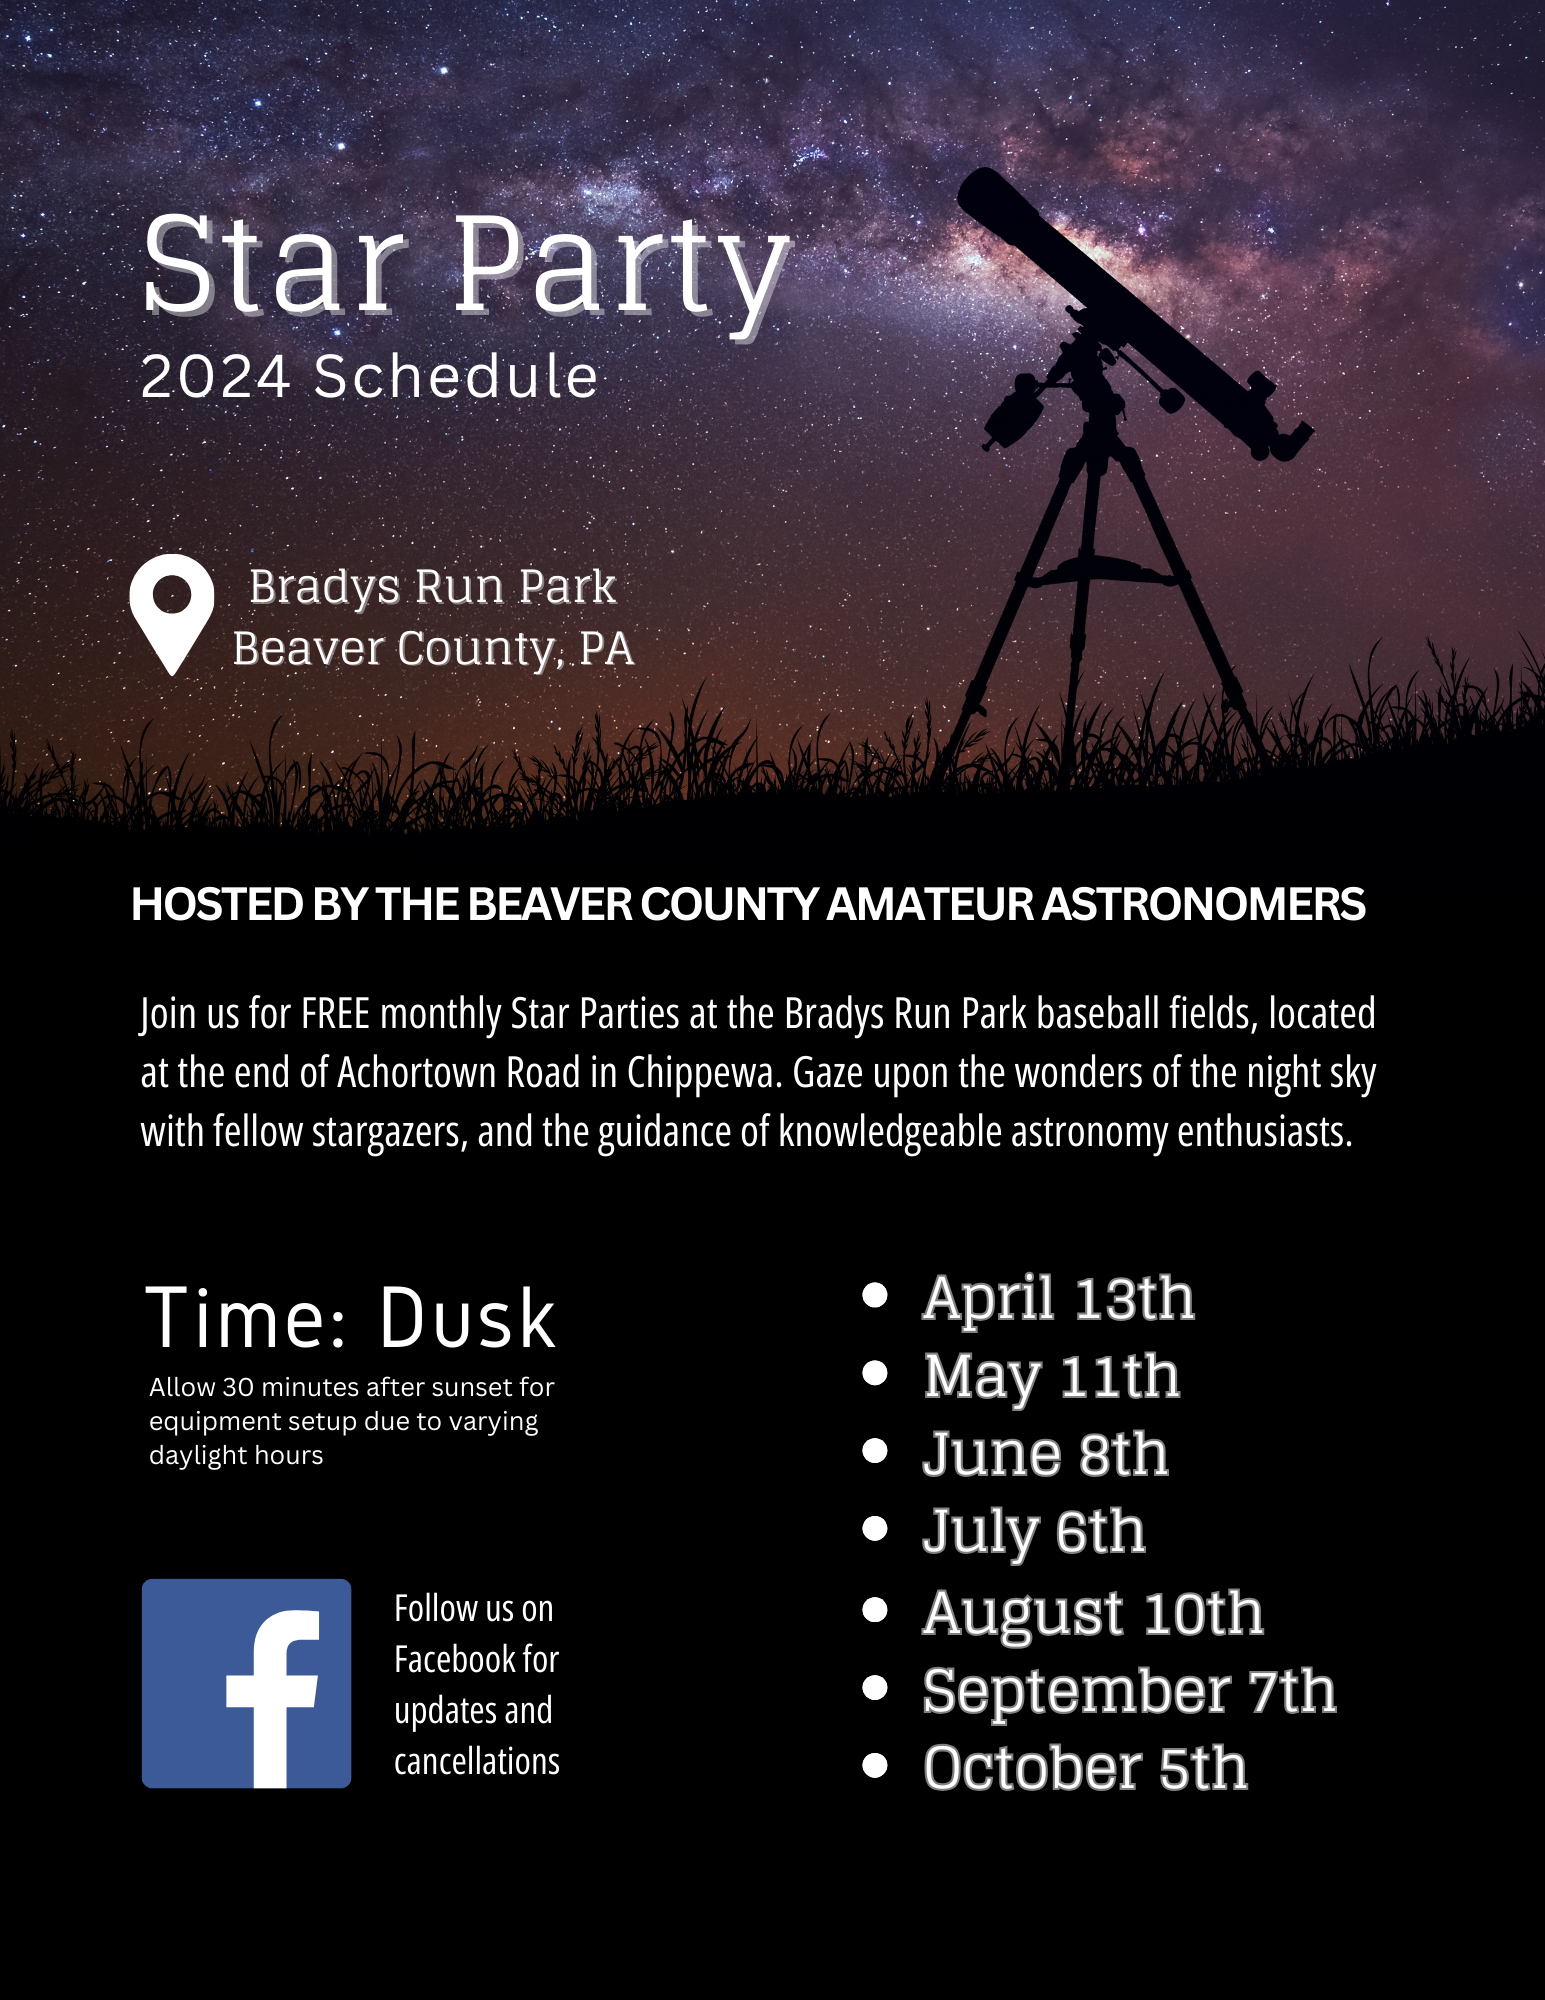 Star Party Schedule - Hosted by the Beaver County Amateur Astronomers